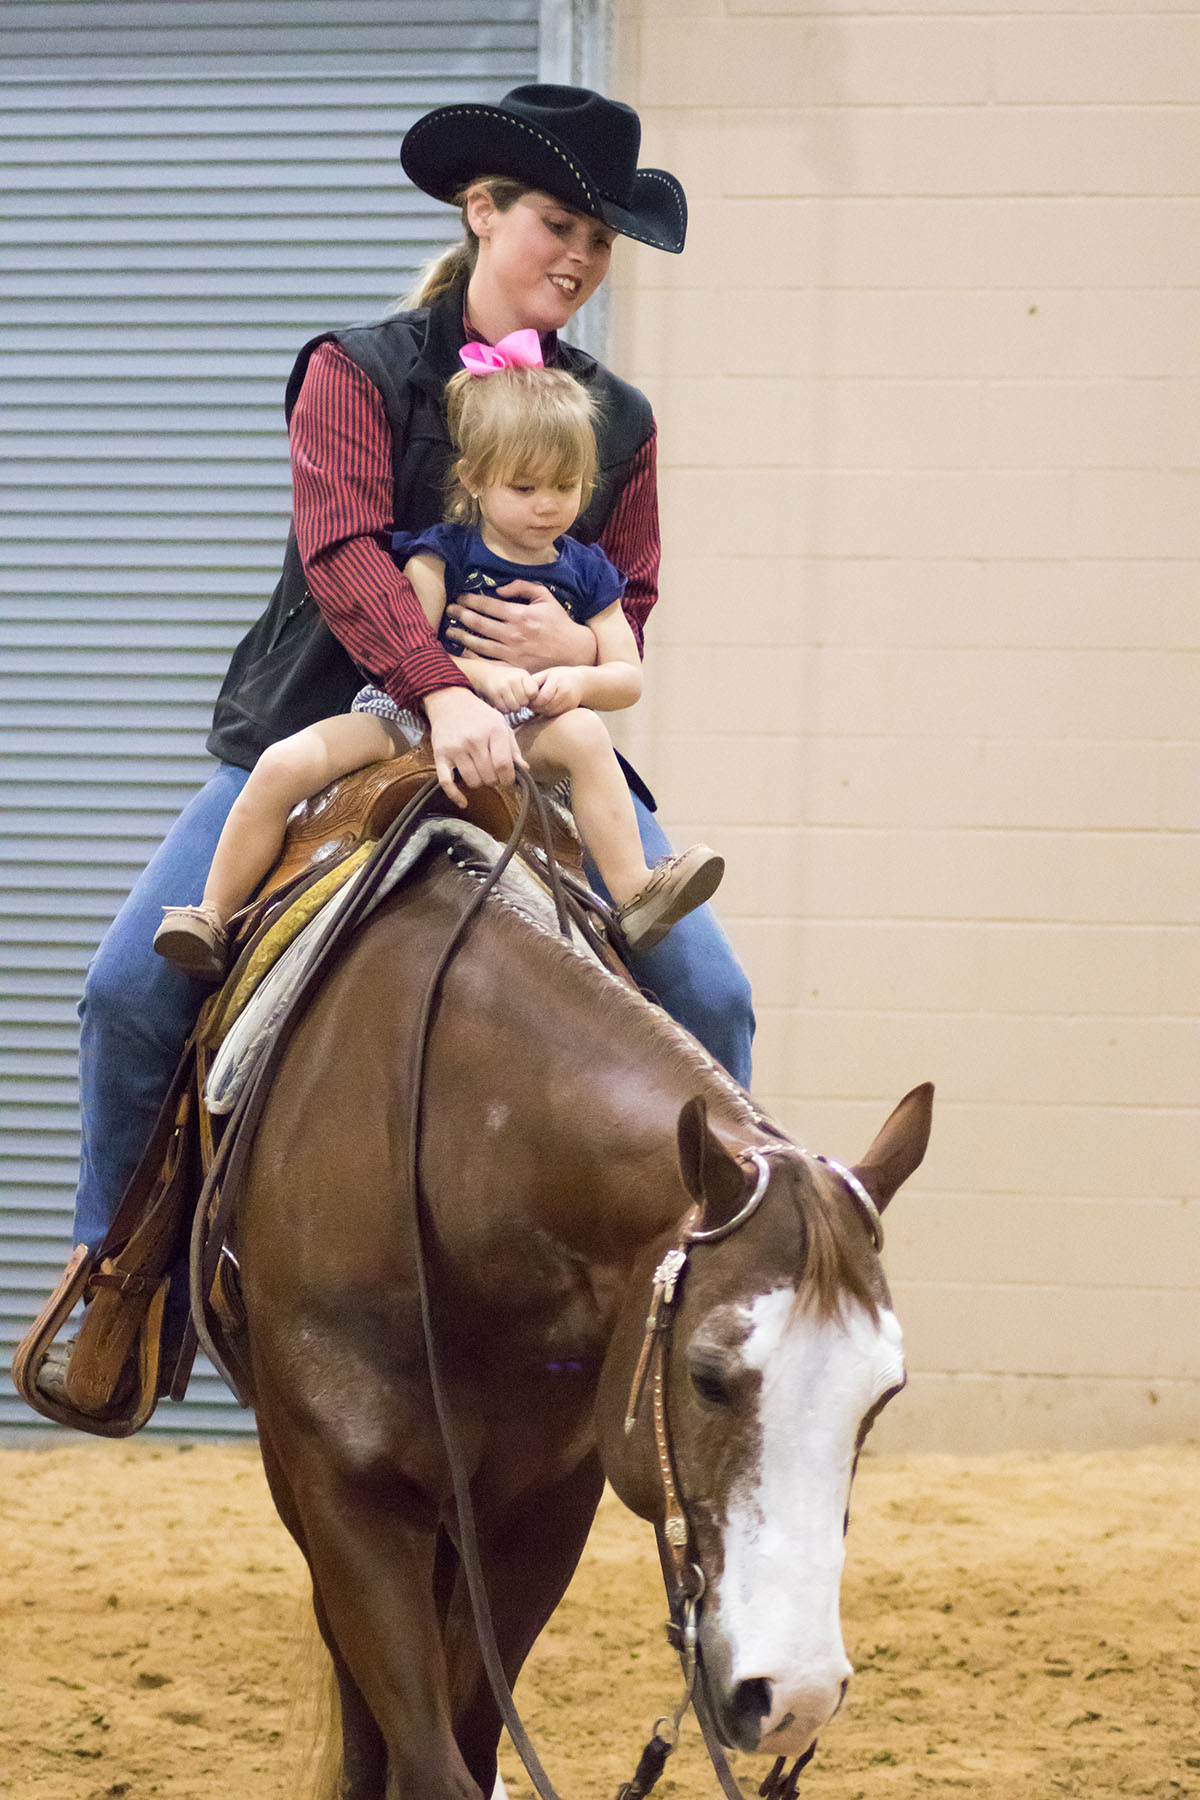 A woman in a black cowboy hat holds a young child on a brown horse